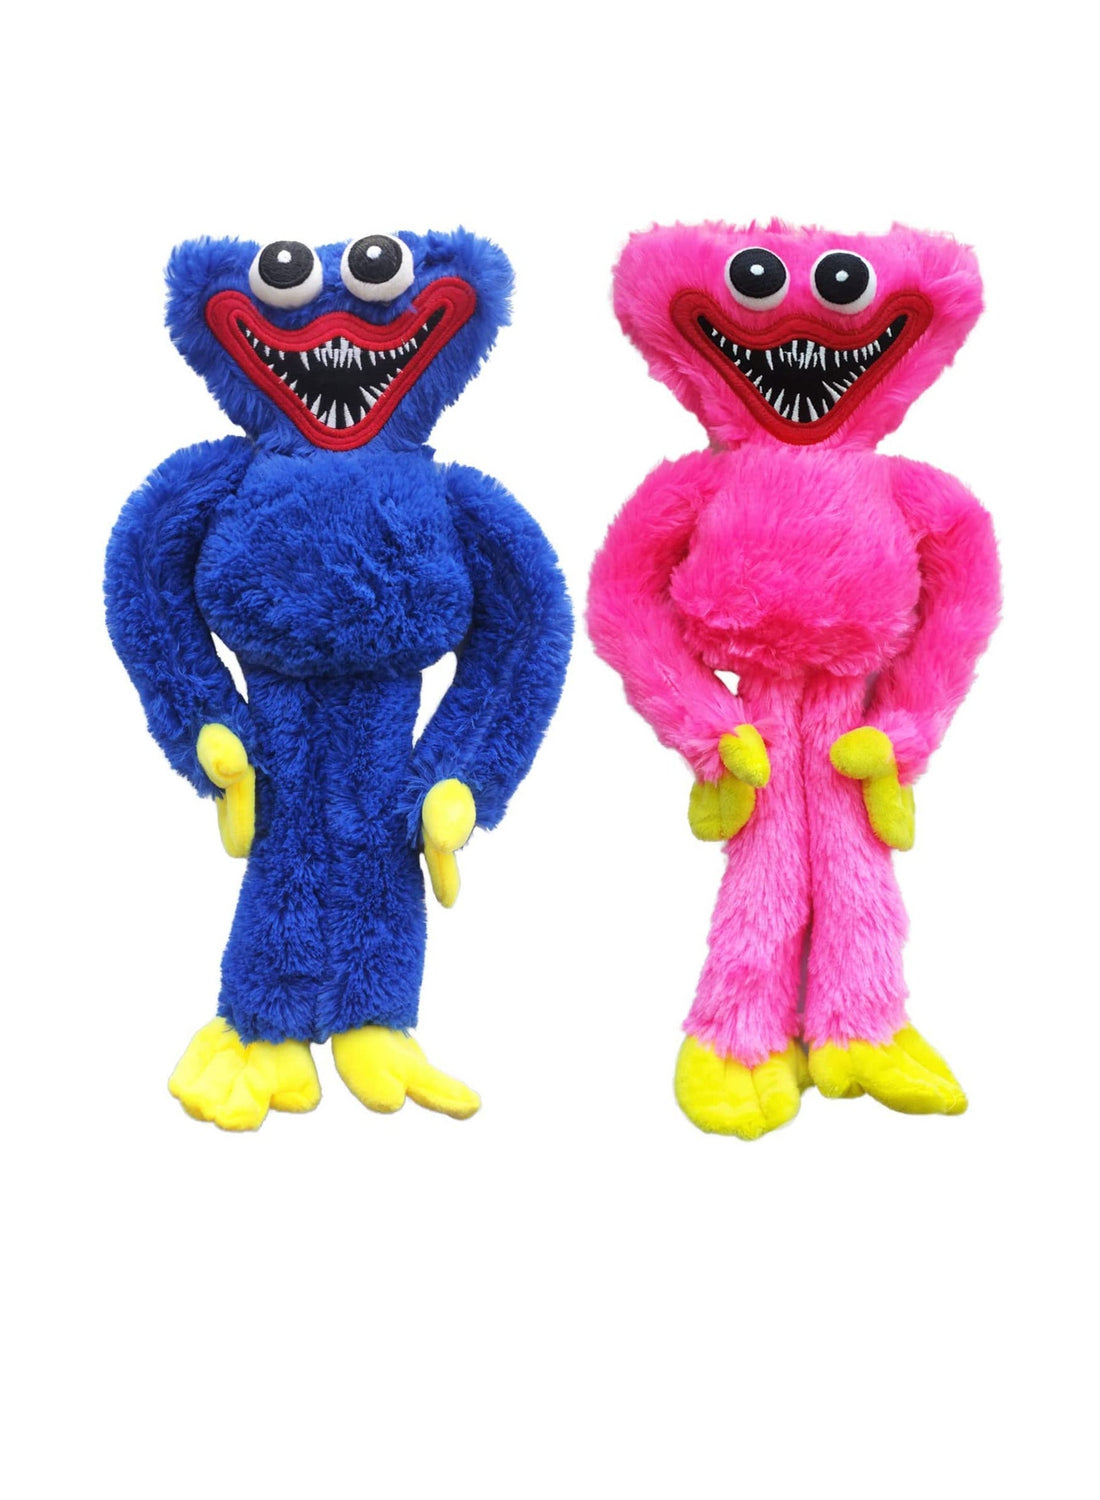 Huggy Wuggy Game Cartoon Character Plush Toy Blue and Pink